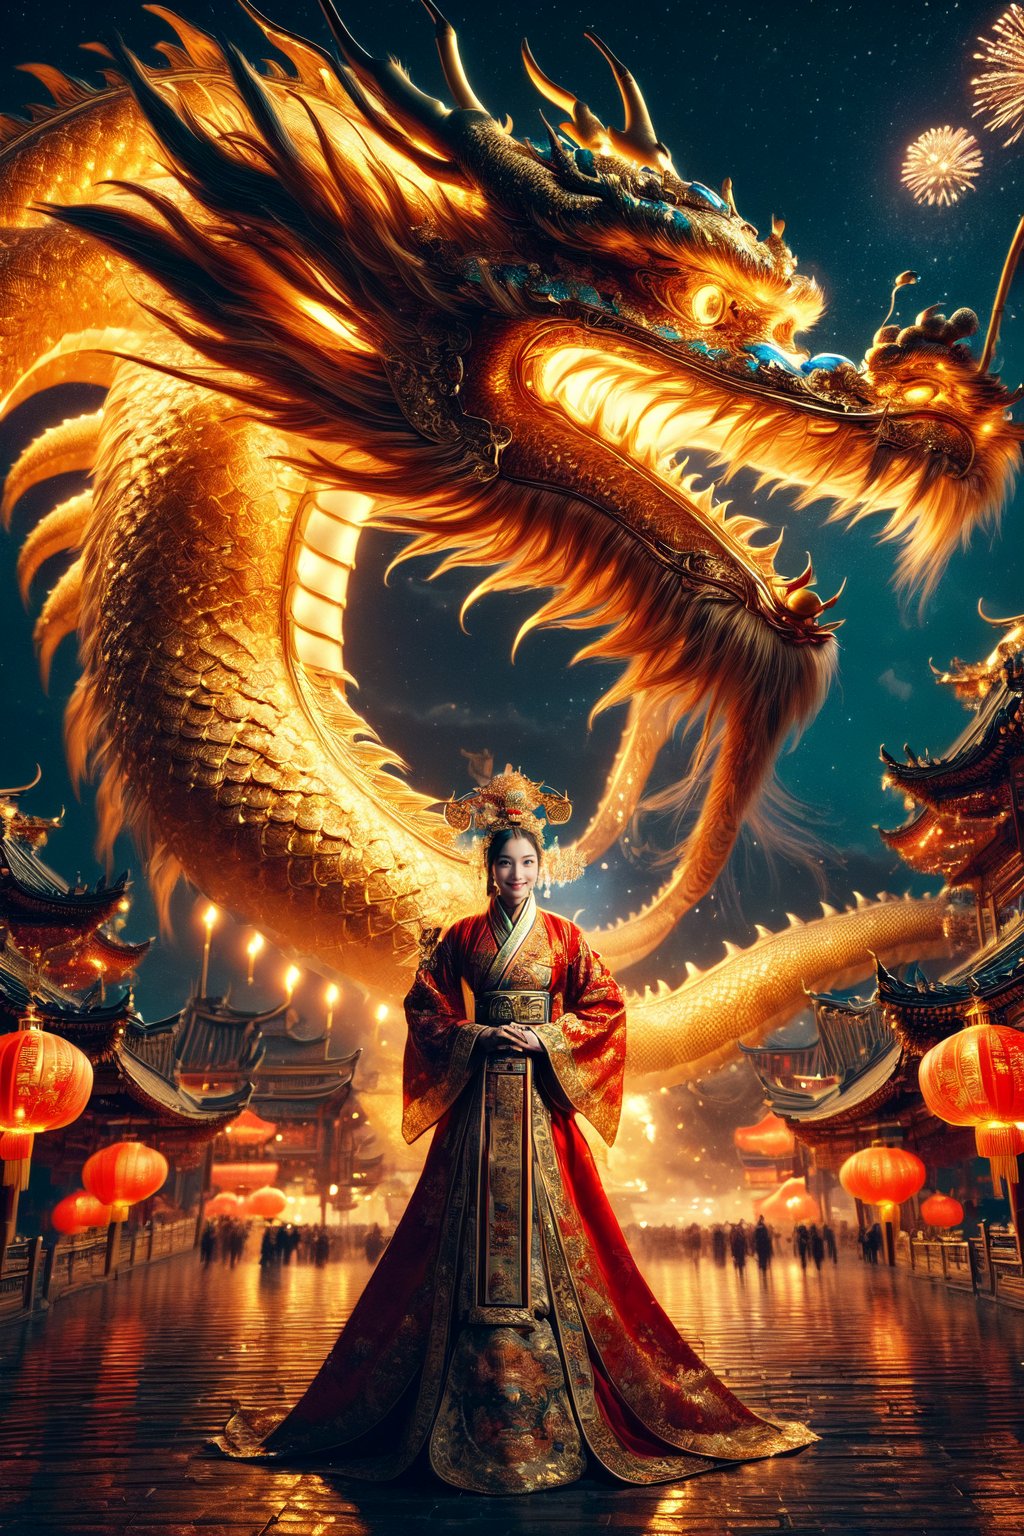 (masterpiece, high quality:1.5), Vibrant, detailed, high-resolution, artistic, majestic, magnificent, elaborate detail, awe-inspiring, splendid, celebratory, 
1 girl, China Tang Dynasty costumes, elegant, traditional, culturally rich, 
night sky, grand fireworks display, glowing red lanterns, cultural heritage, festive atmosphere, ancient cityscape, traditional architecture, 
(Giant golden dragon:1.1), flying dragon in the sky, large, majestic, overwhelming presence, by FuturEvoLab, historical, mythical, dynamic, visually striking, Exquisite face,